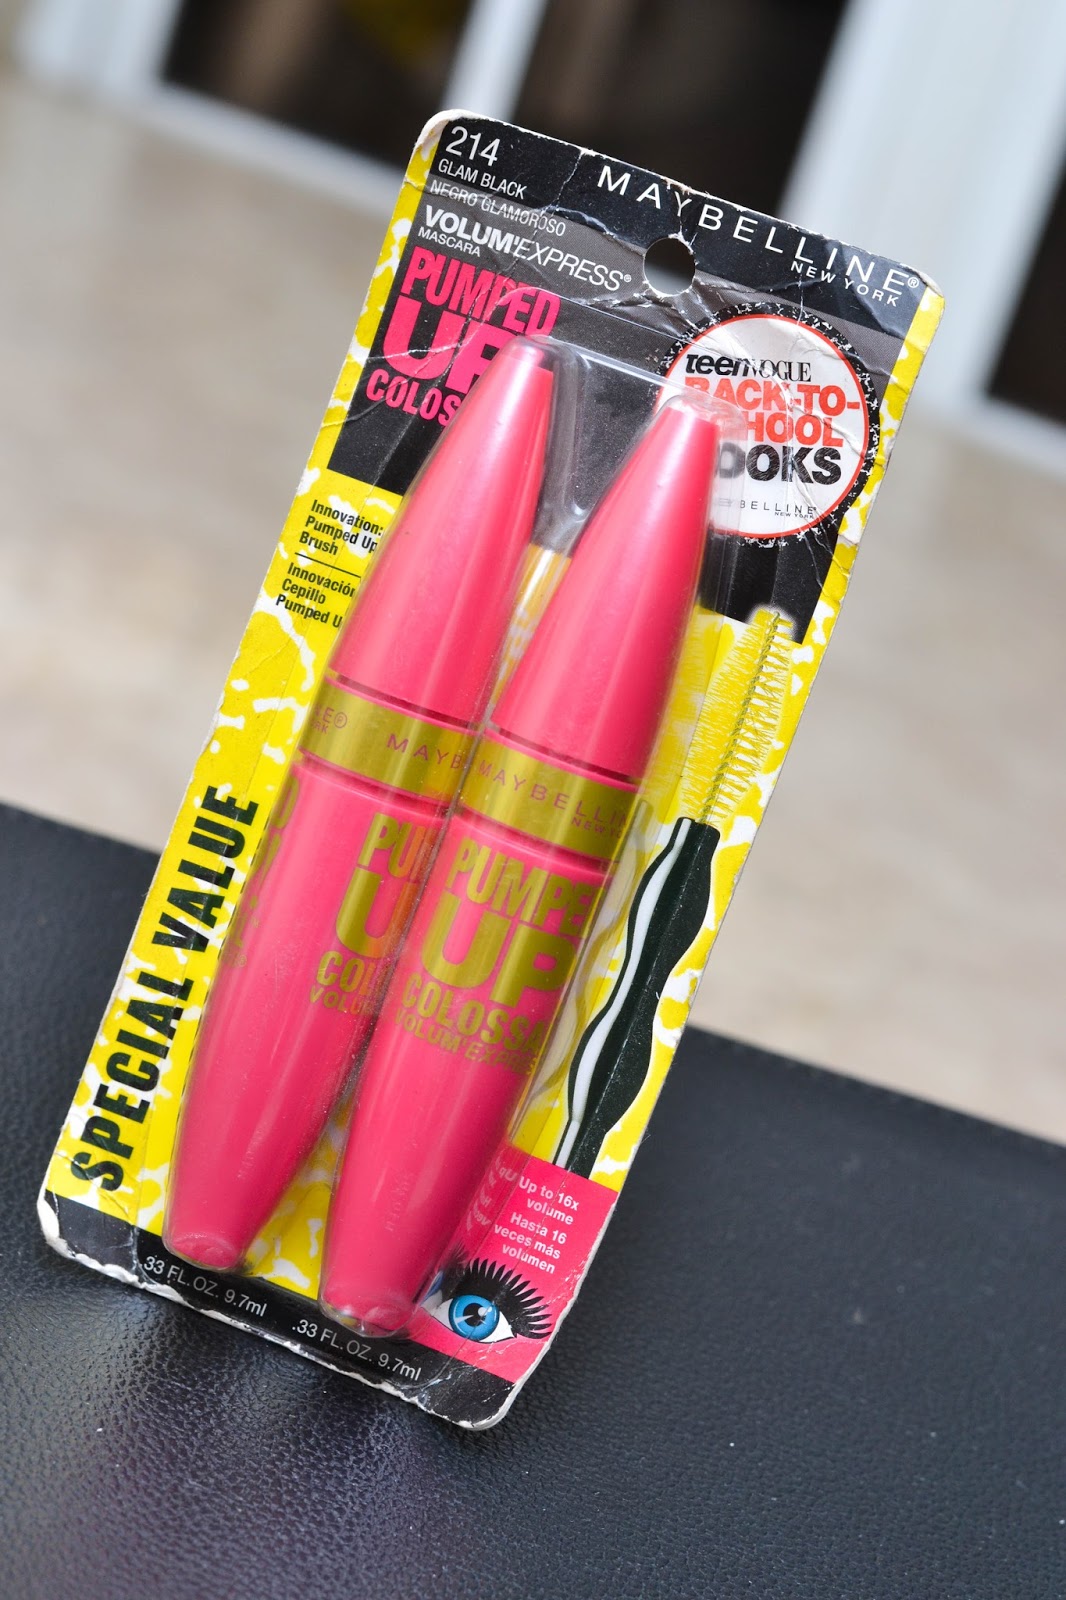 2 in 1 Maybelline Colossal Volume Express Mascara